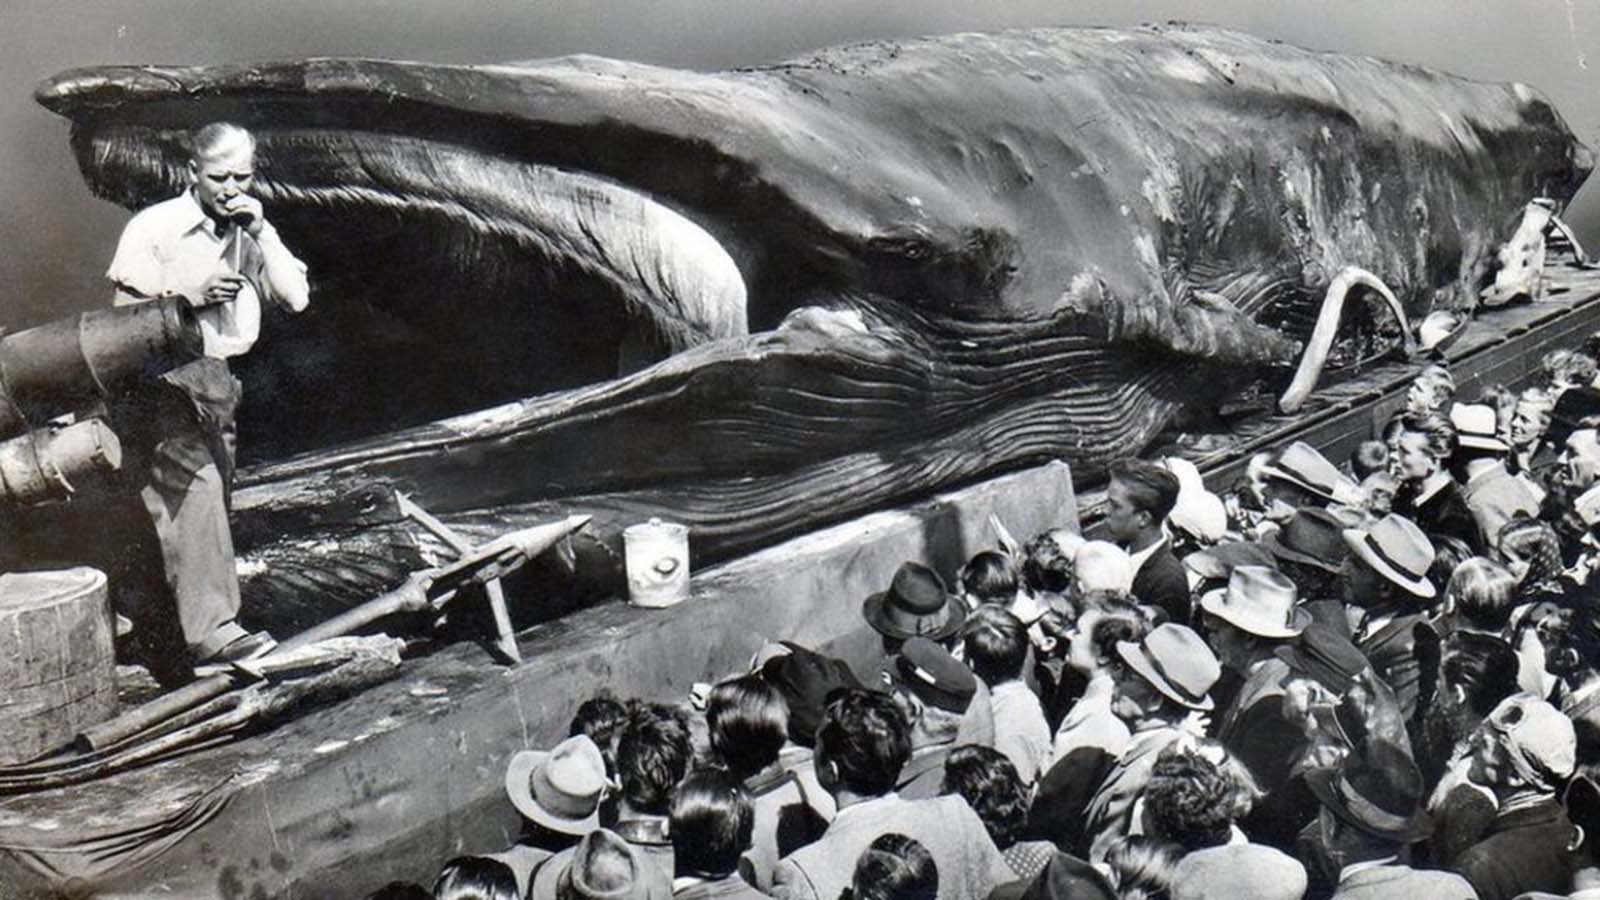 Instruments of whale-killing, such as harpoons, were displayed alongside the corpse.